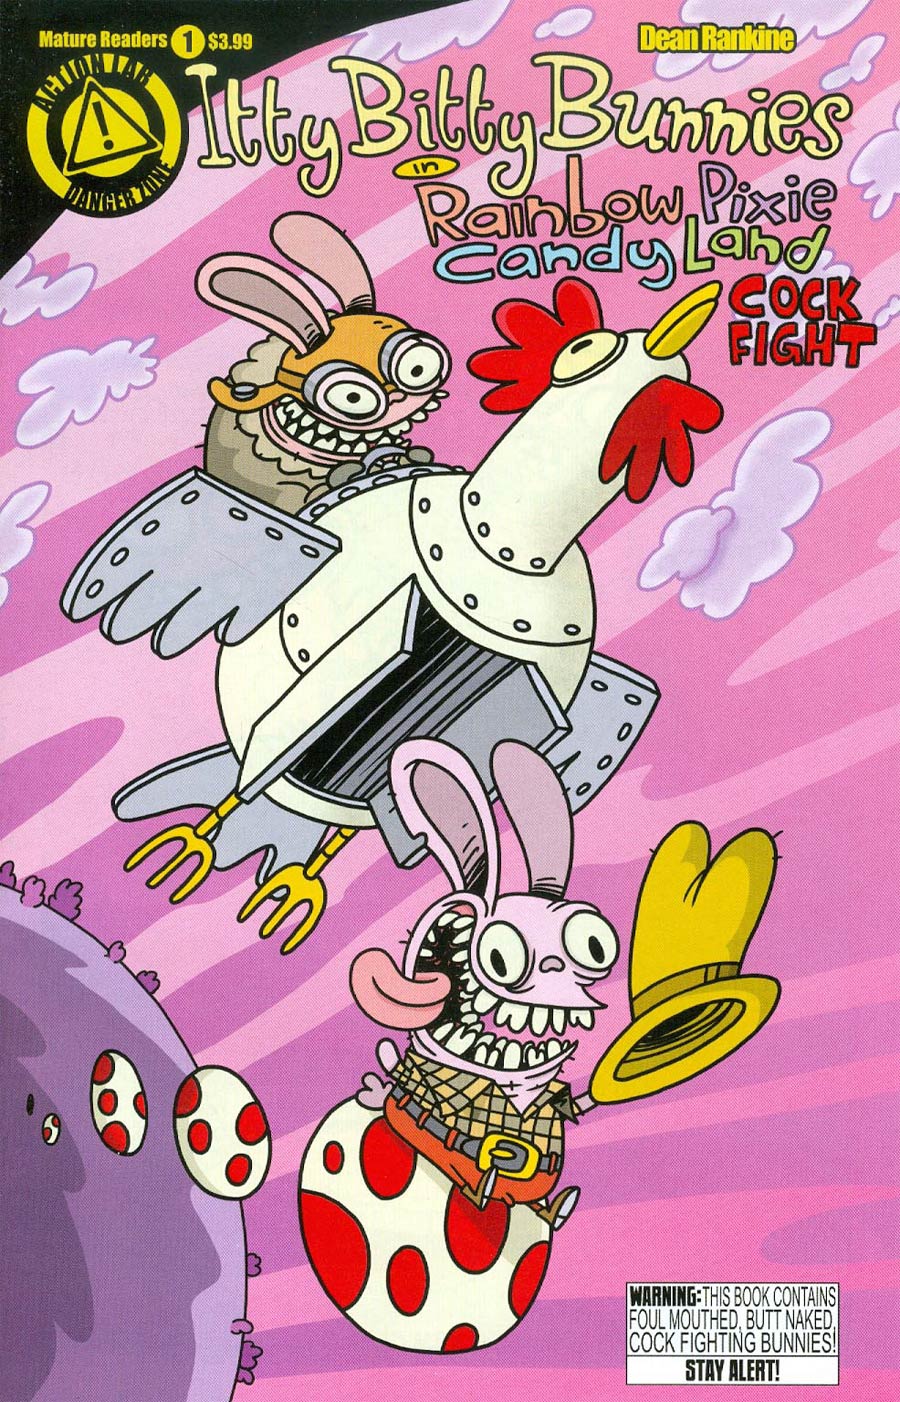 Itty Bitty Bunnies In Rainbow Pixie Candy Land Cock Fight One Shot Cover A Regular Dean Rankine Cover